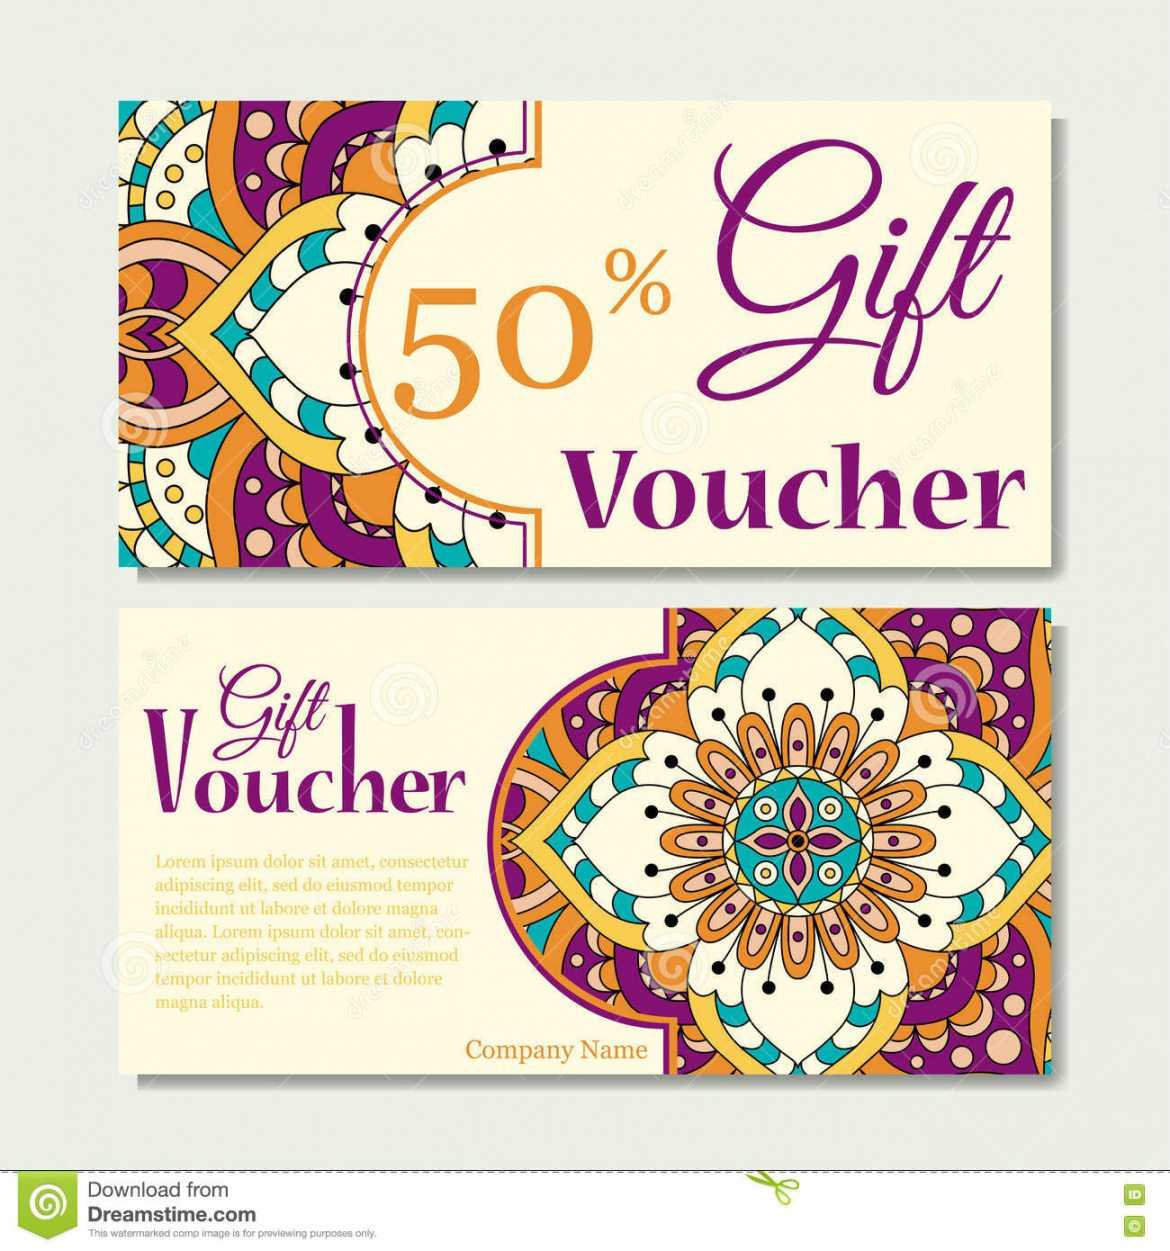 Editable Gift Voucher Template With Mandala Design Intended For Magazine Subscription Gift Certificate Template